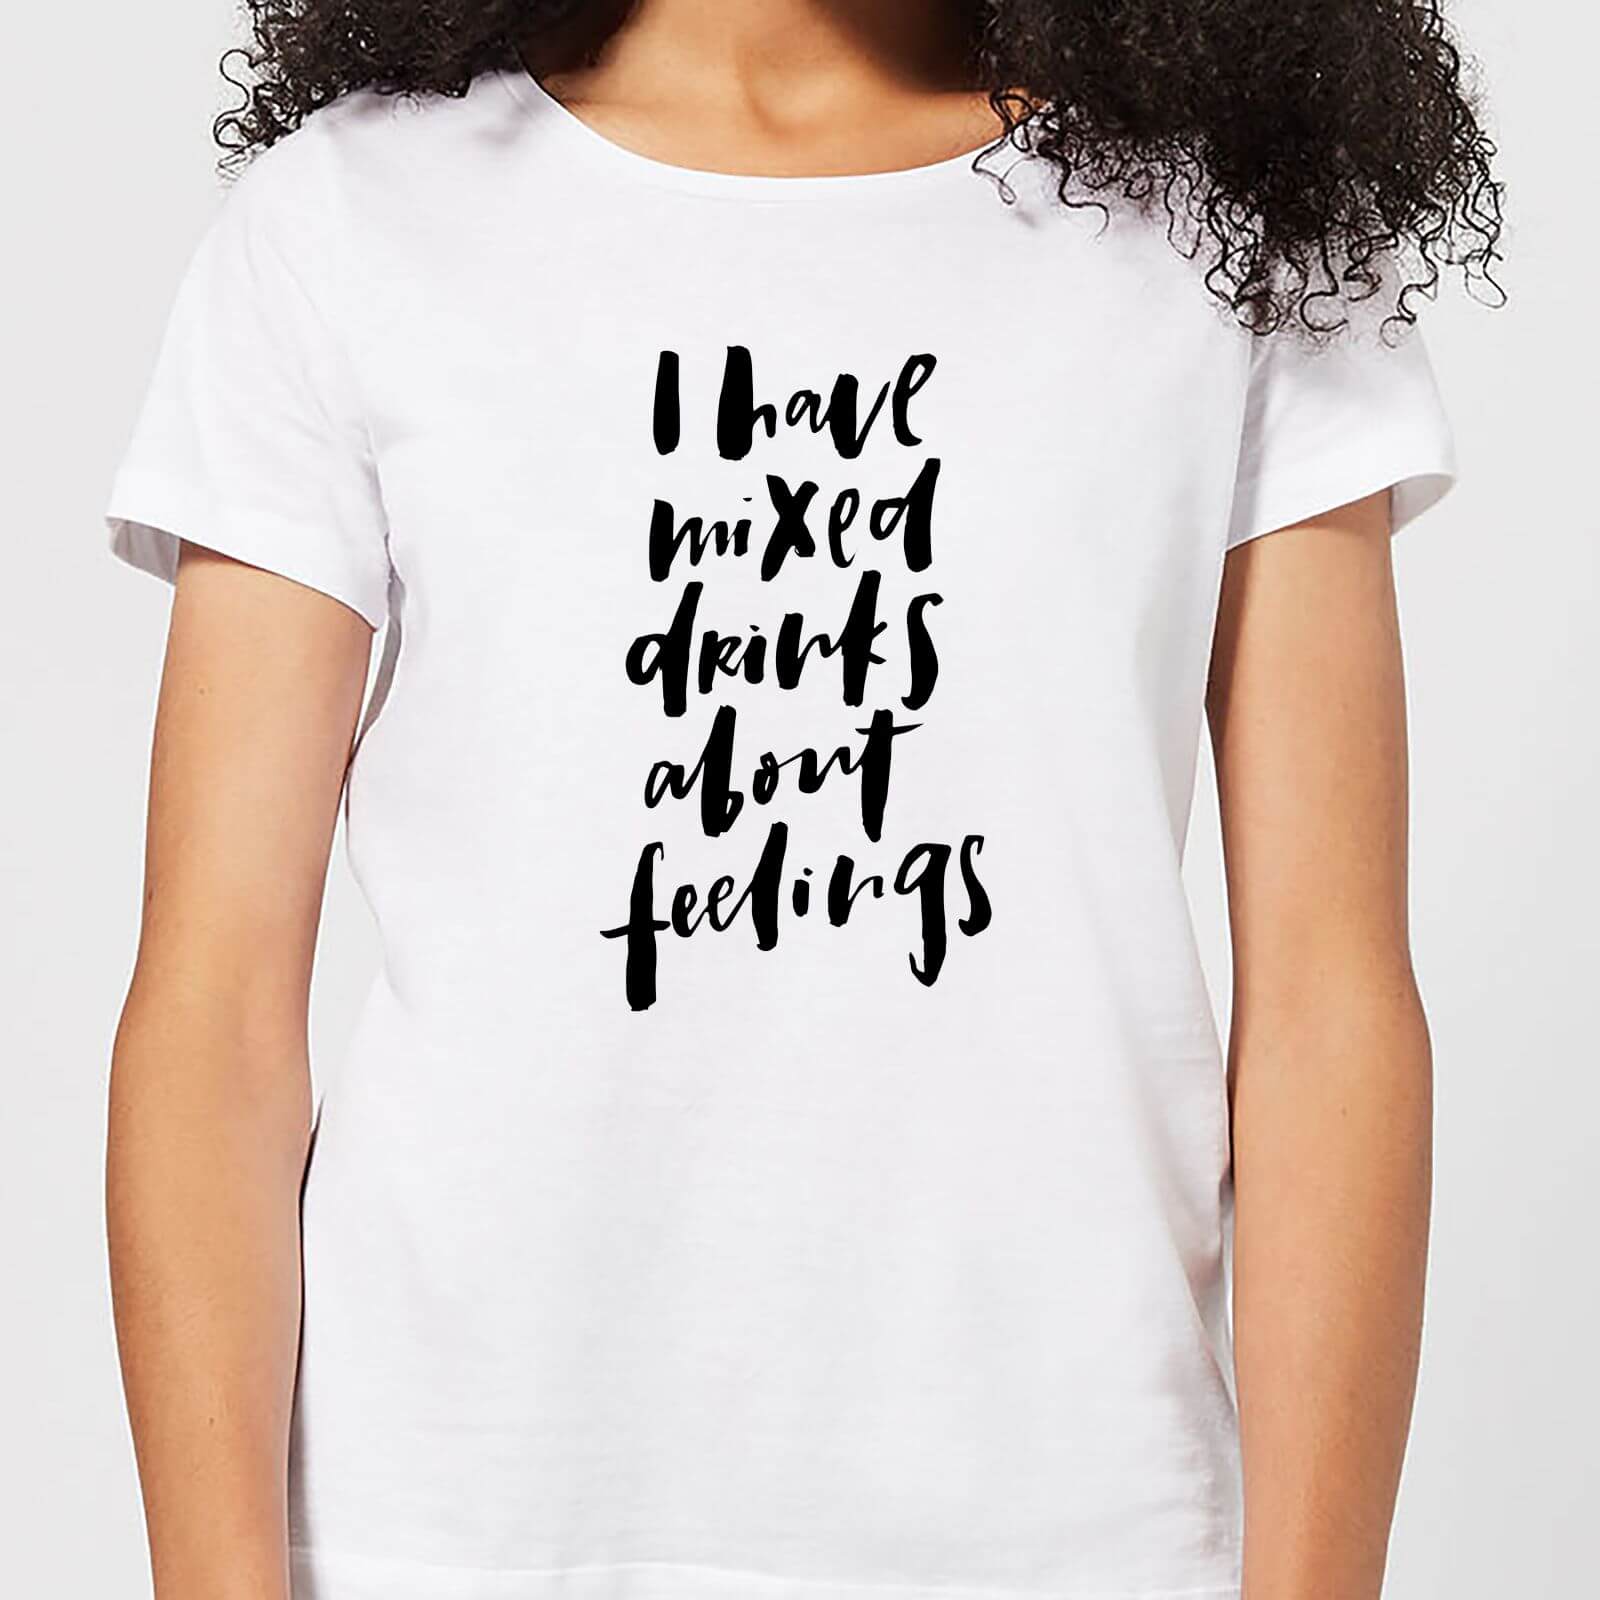 I Have Mixed Drinks About Feelings Women's T-Shirt - White - S - White